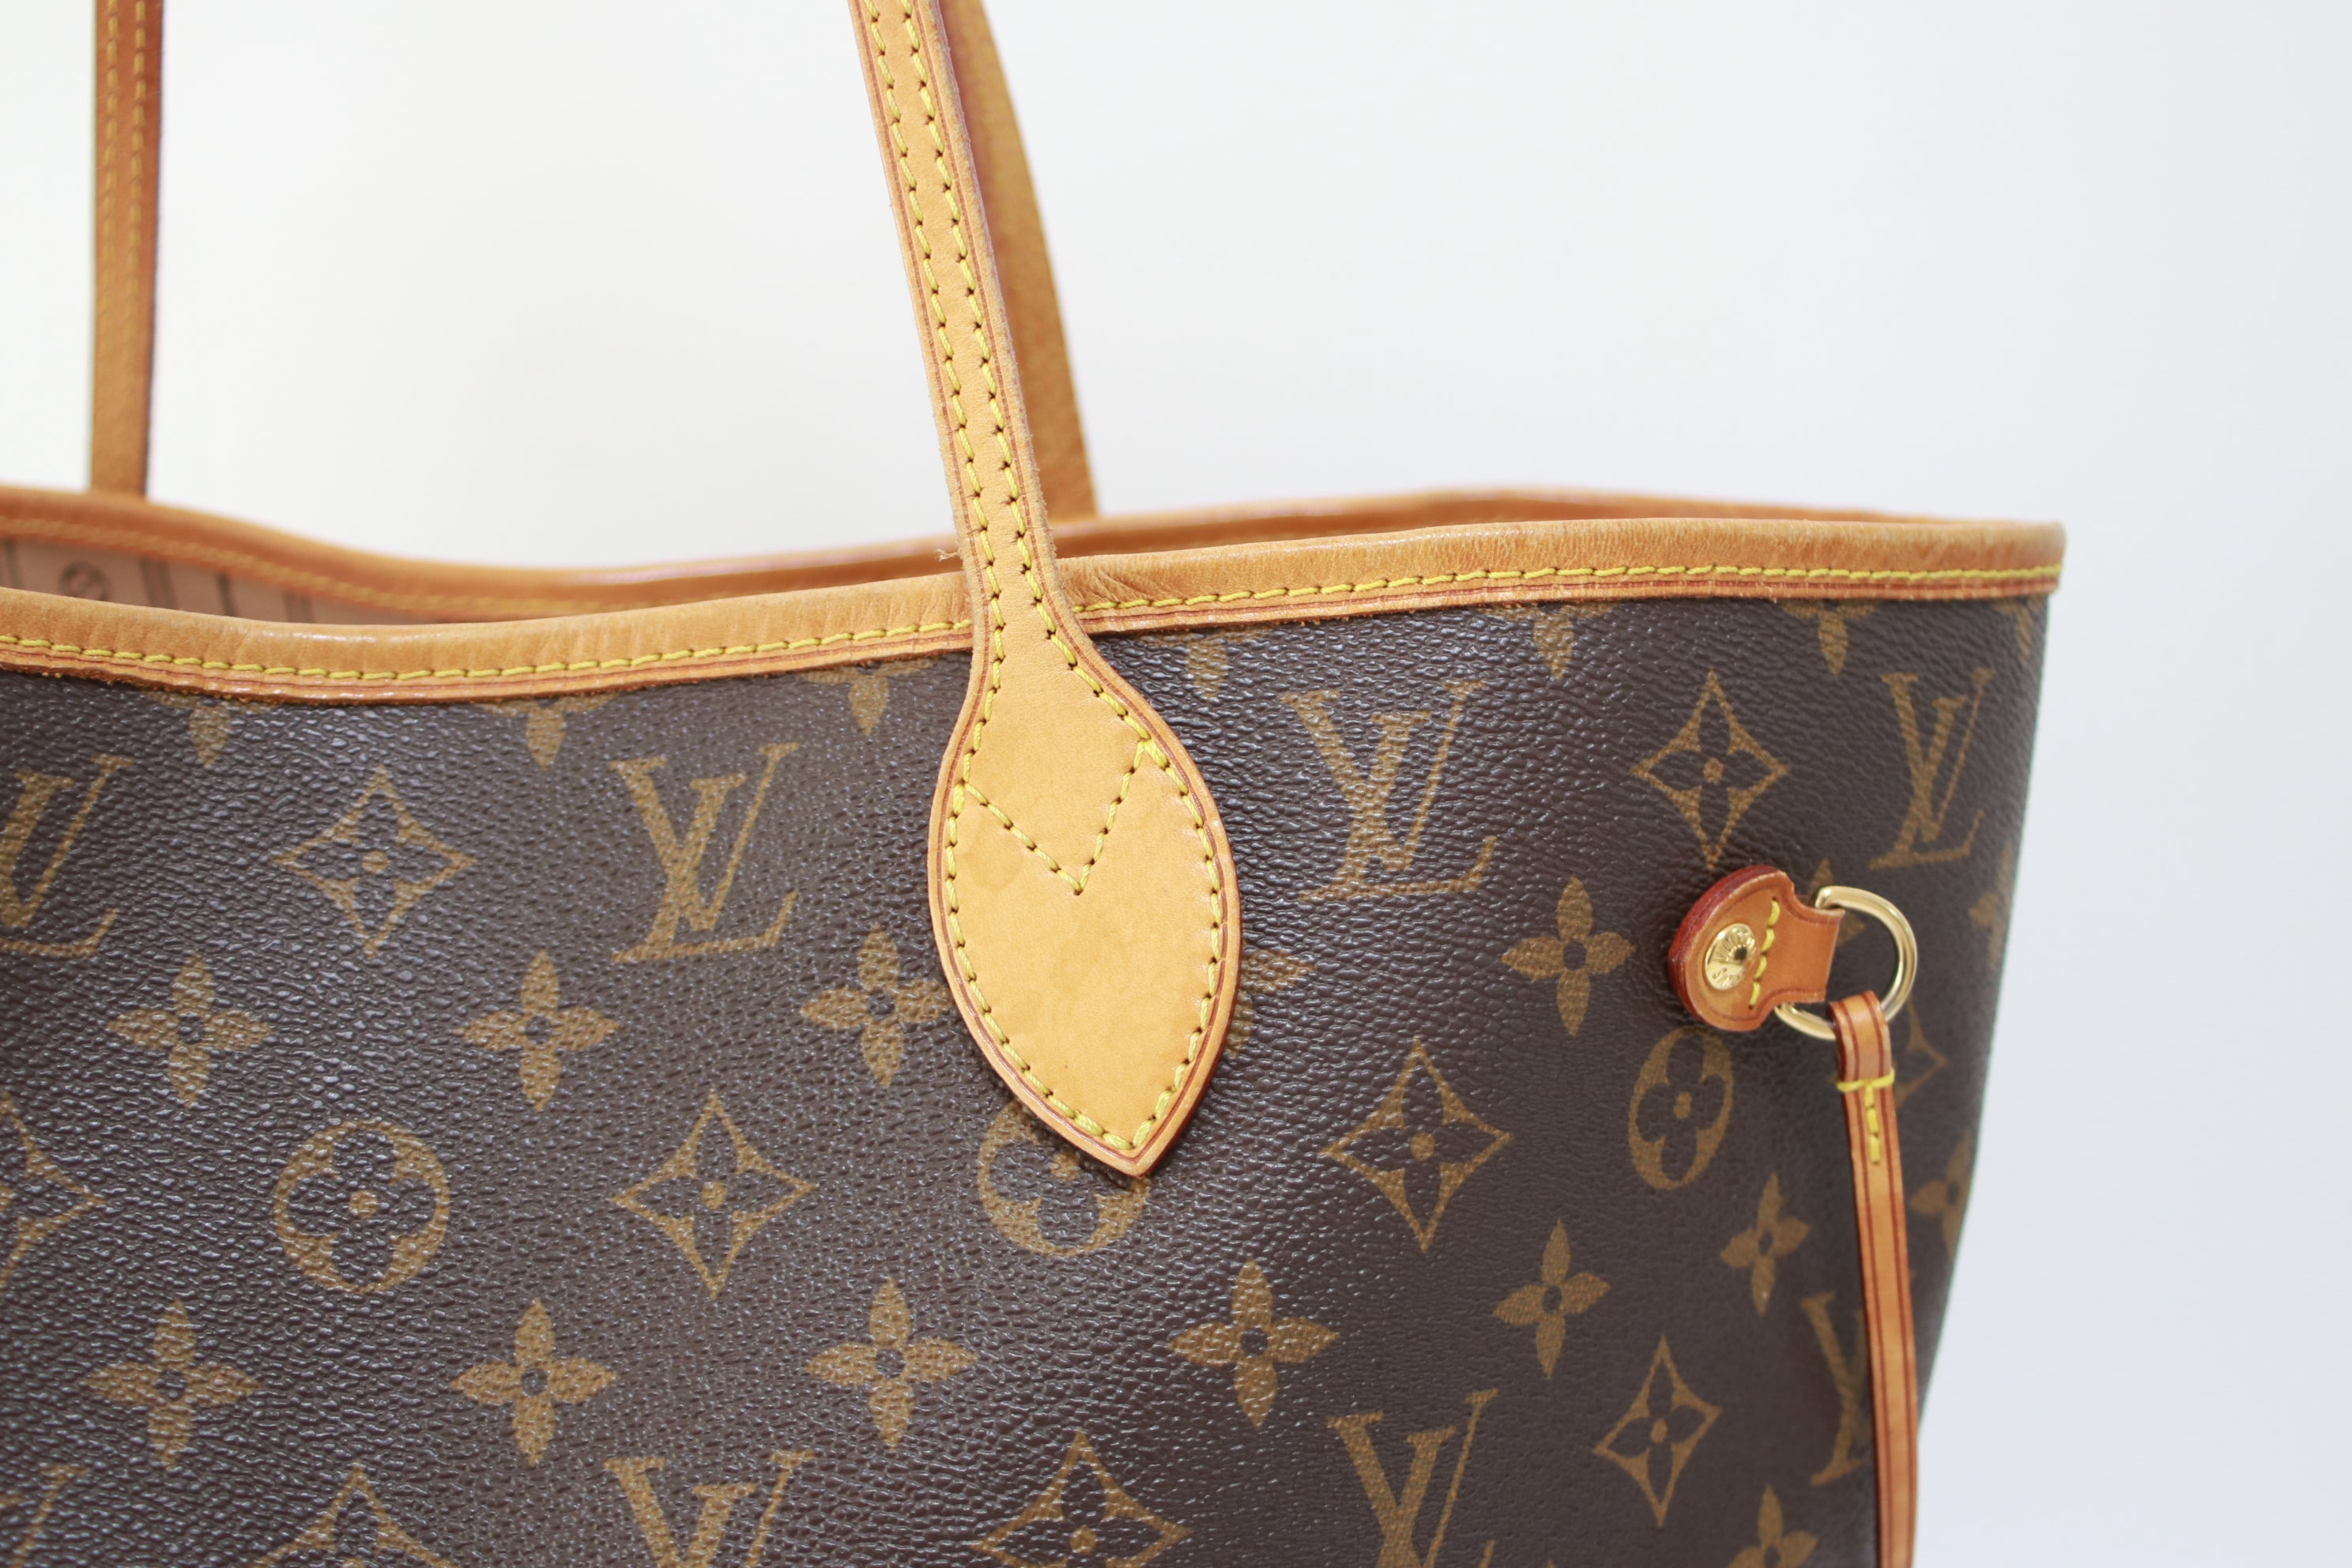 Louis Vuitton Neverfull MM Shoulder Tote Bag Used (7312)